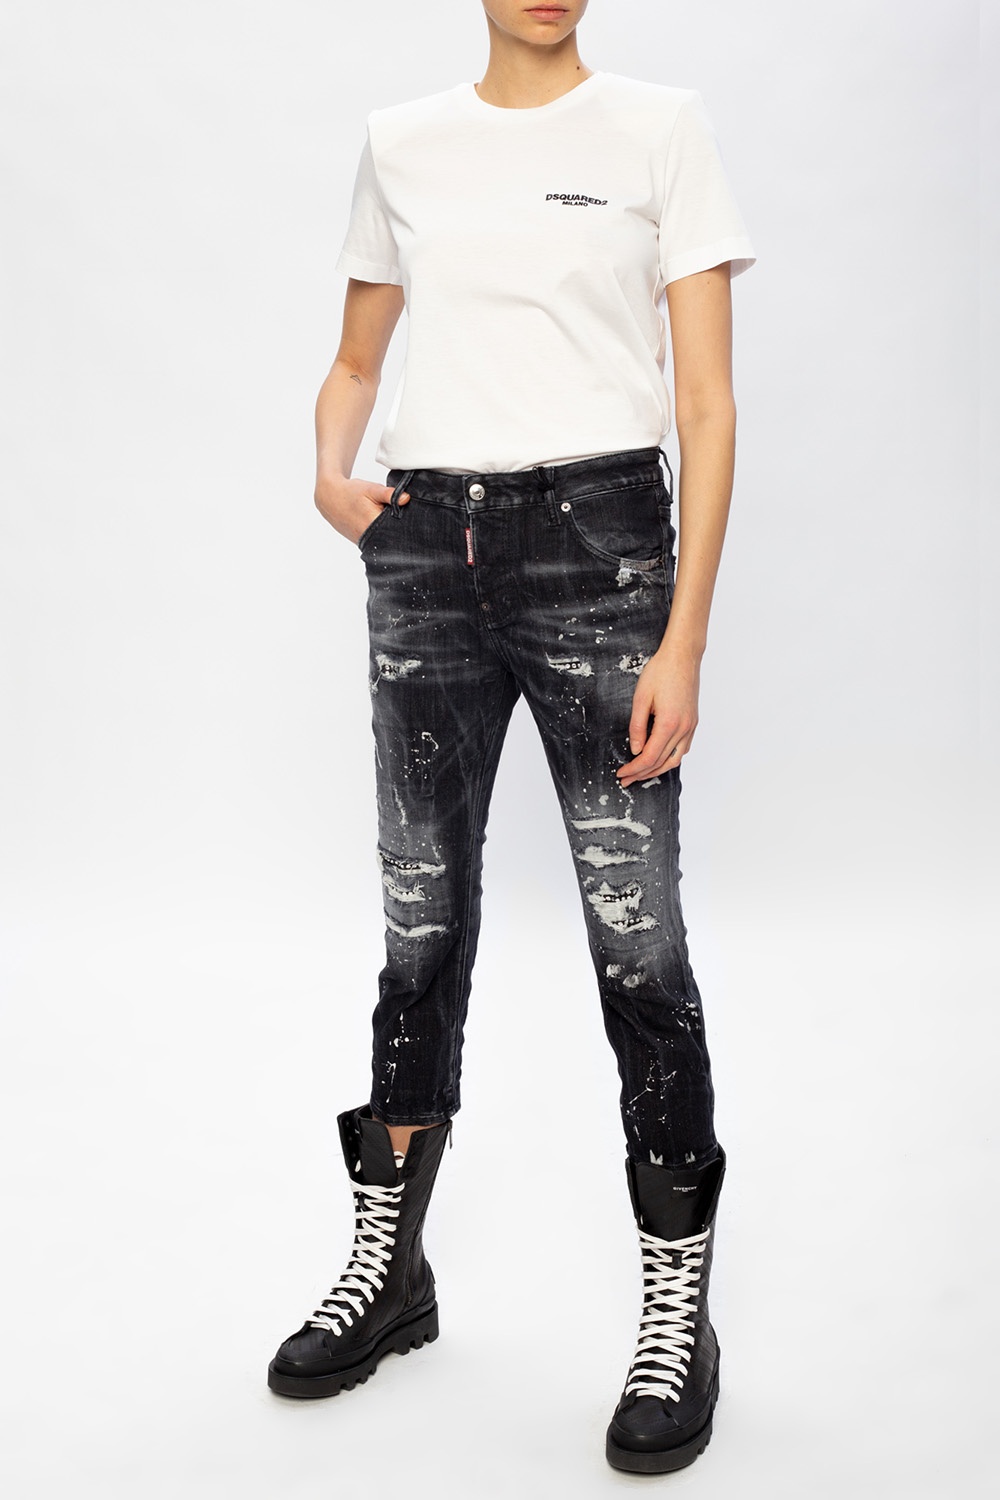 Dsquared2 'Cool Girl Cropped Jean' raw-cut jeans | Women's